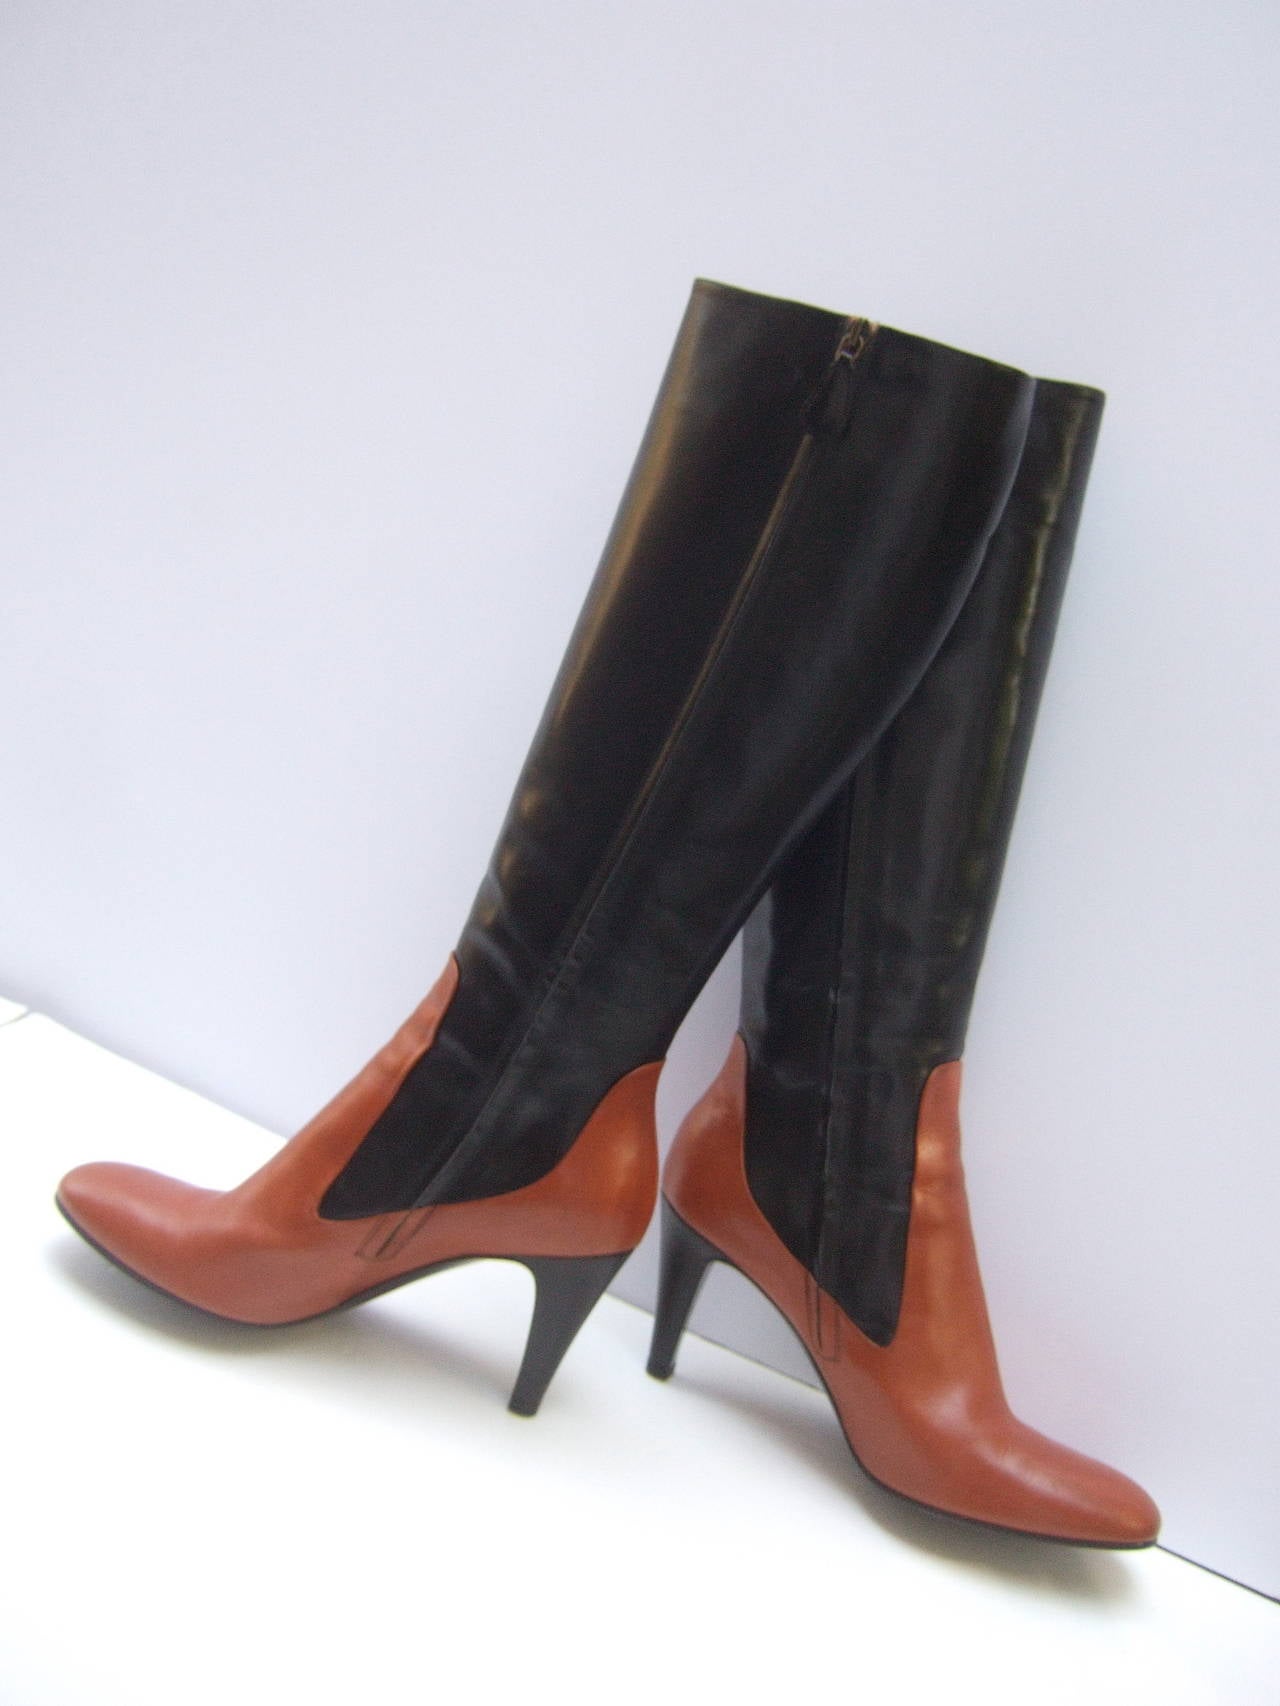 Alexander McQueen Black & Brown Leather Boots Made in Italy Size 39.5 2